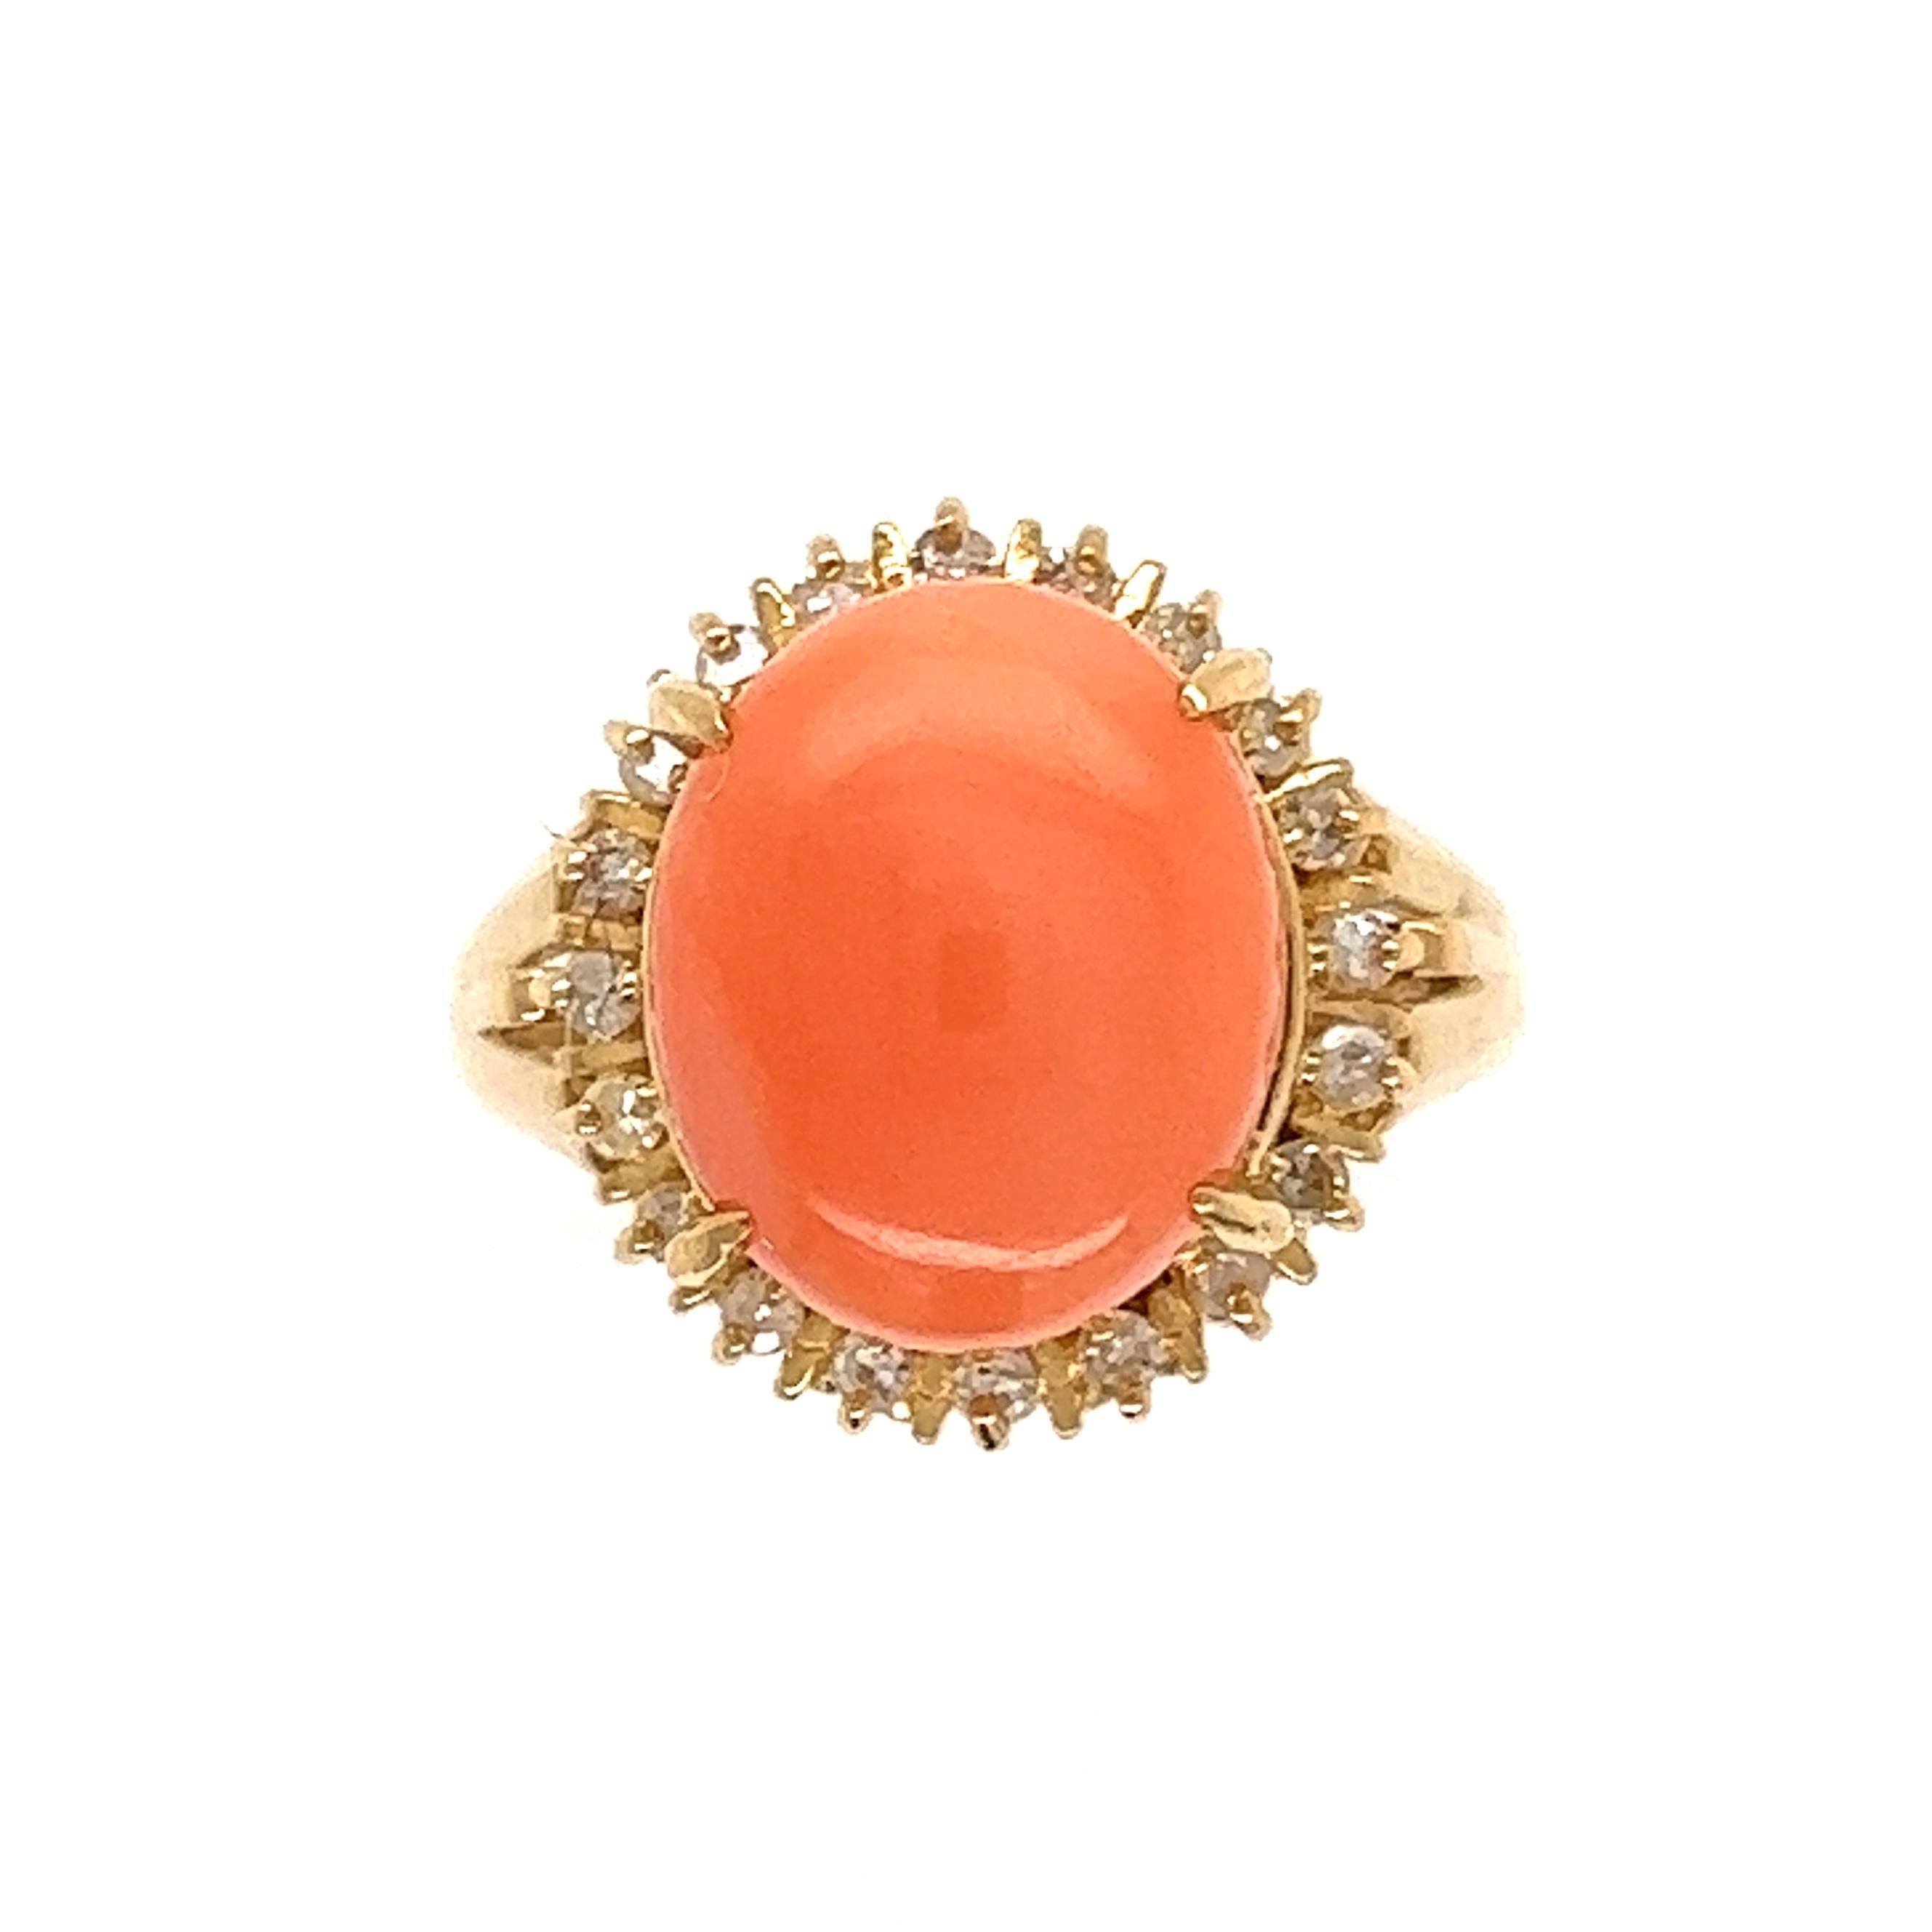 Beautiful Angelskin Coral and Diamond Cocktail Ring. Center securely set with a Cabochon Angelskin Coral, surrounded by Diamonds, weighing approx. 0.21tcw. Hand crafted 18K Yellow Gold mounting. Approx. dimensions: 1.11